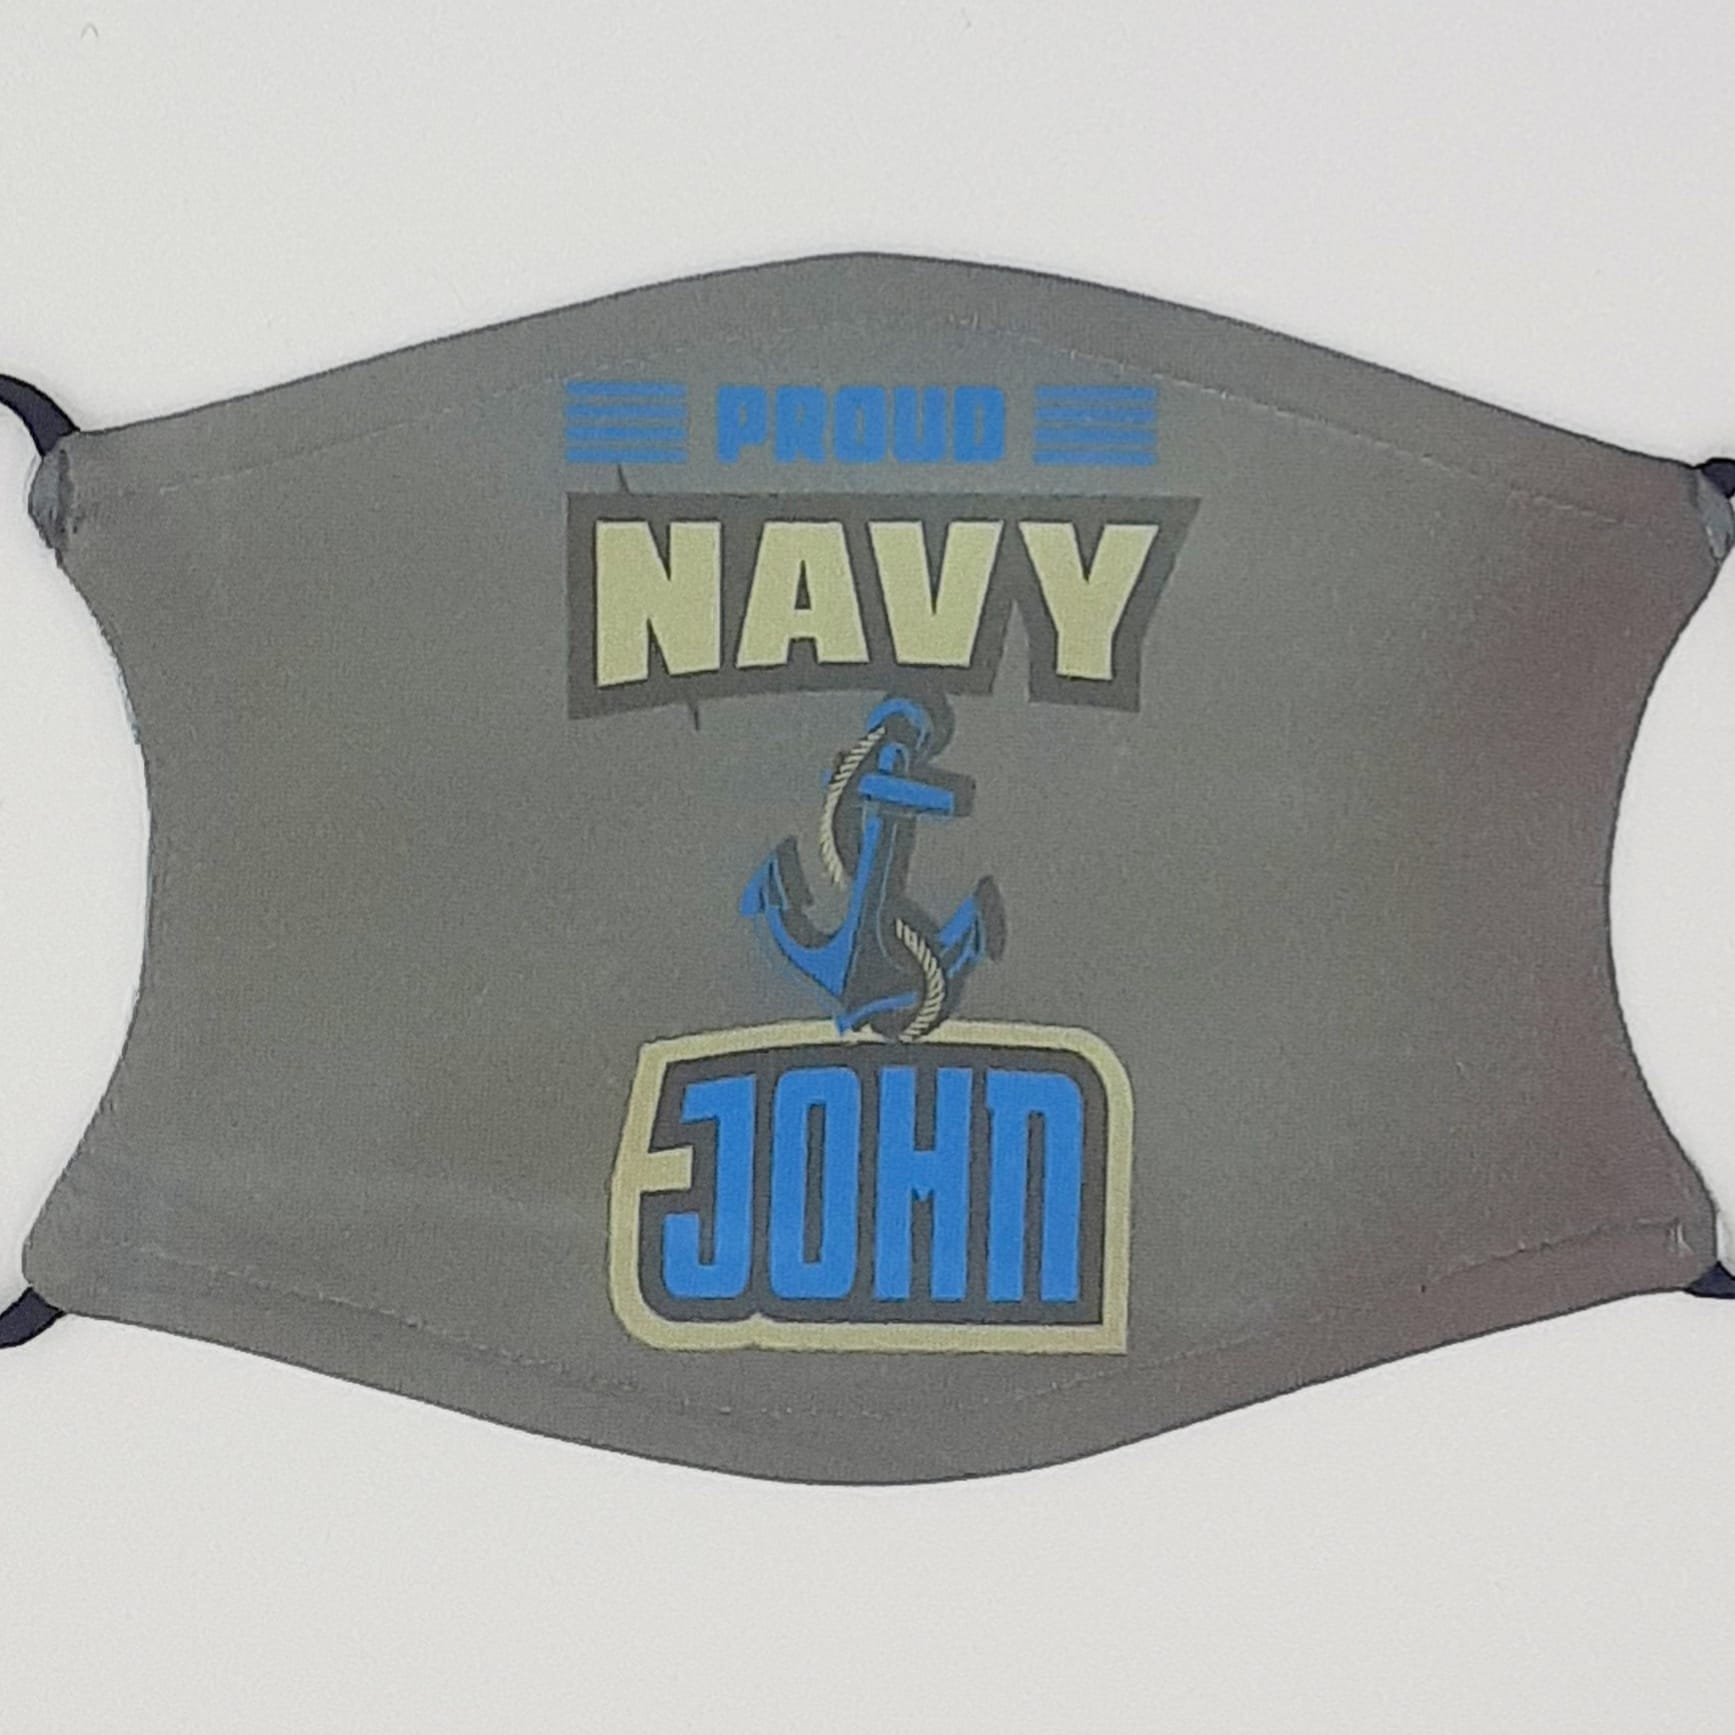 I made this mask for a caring VA lab tech who is a Navy veteran. I love the masks because the c